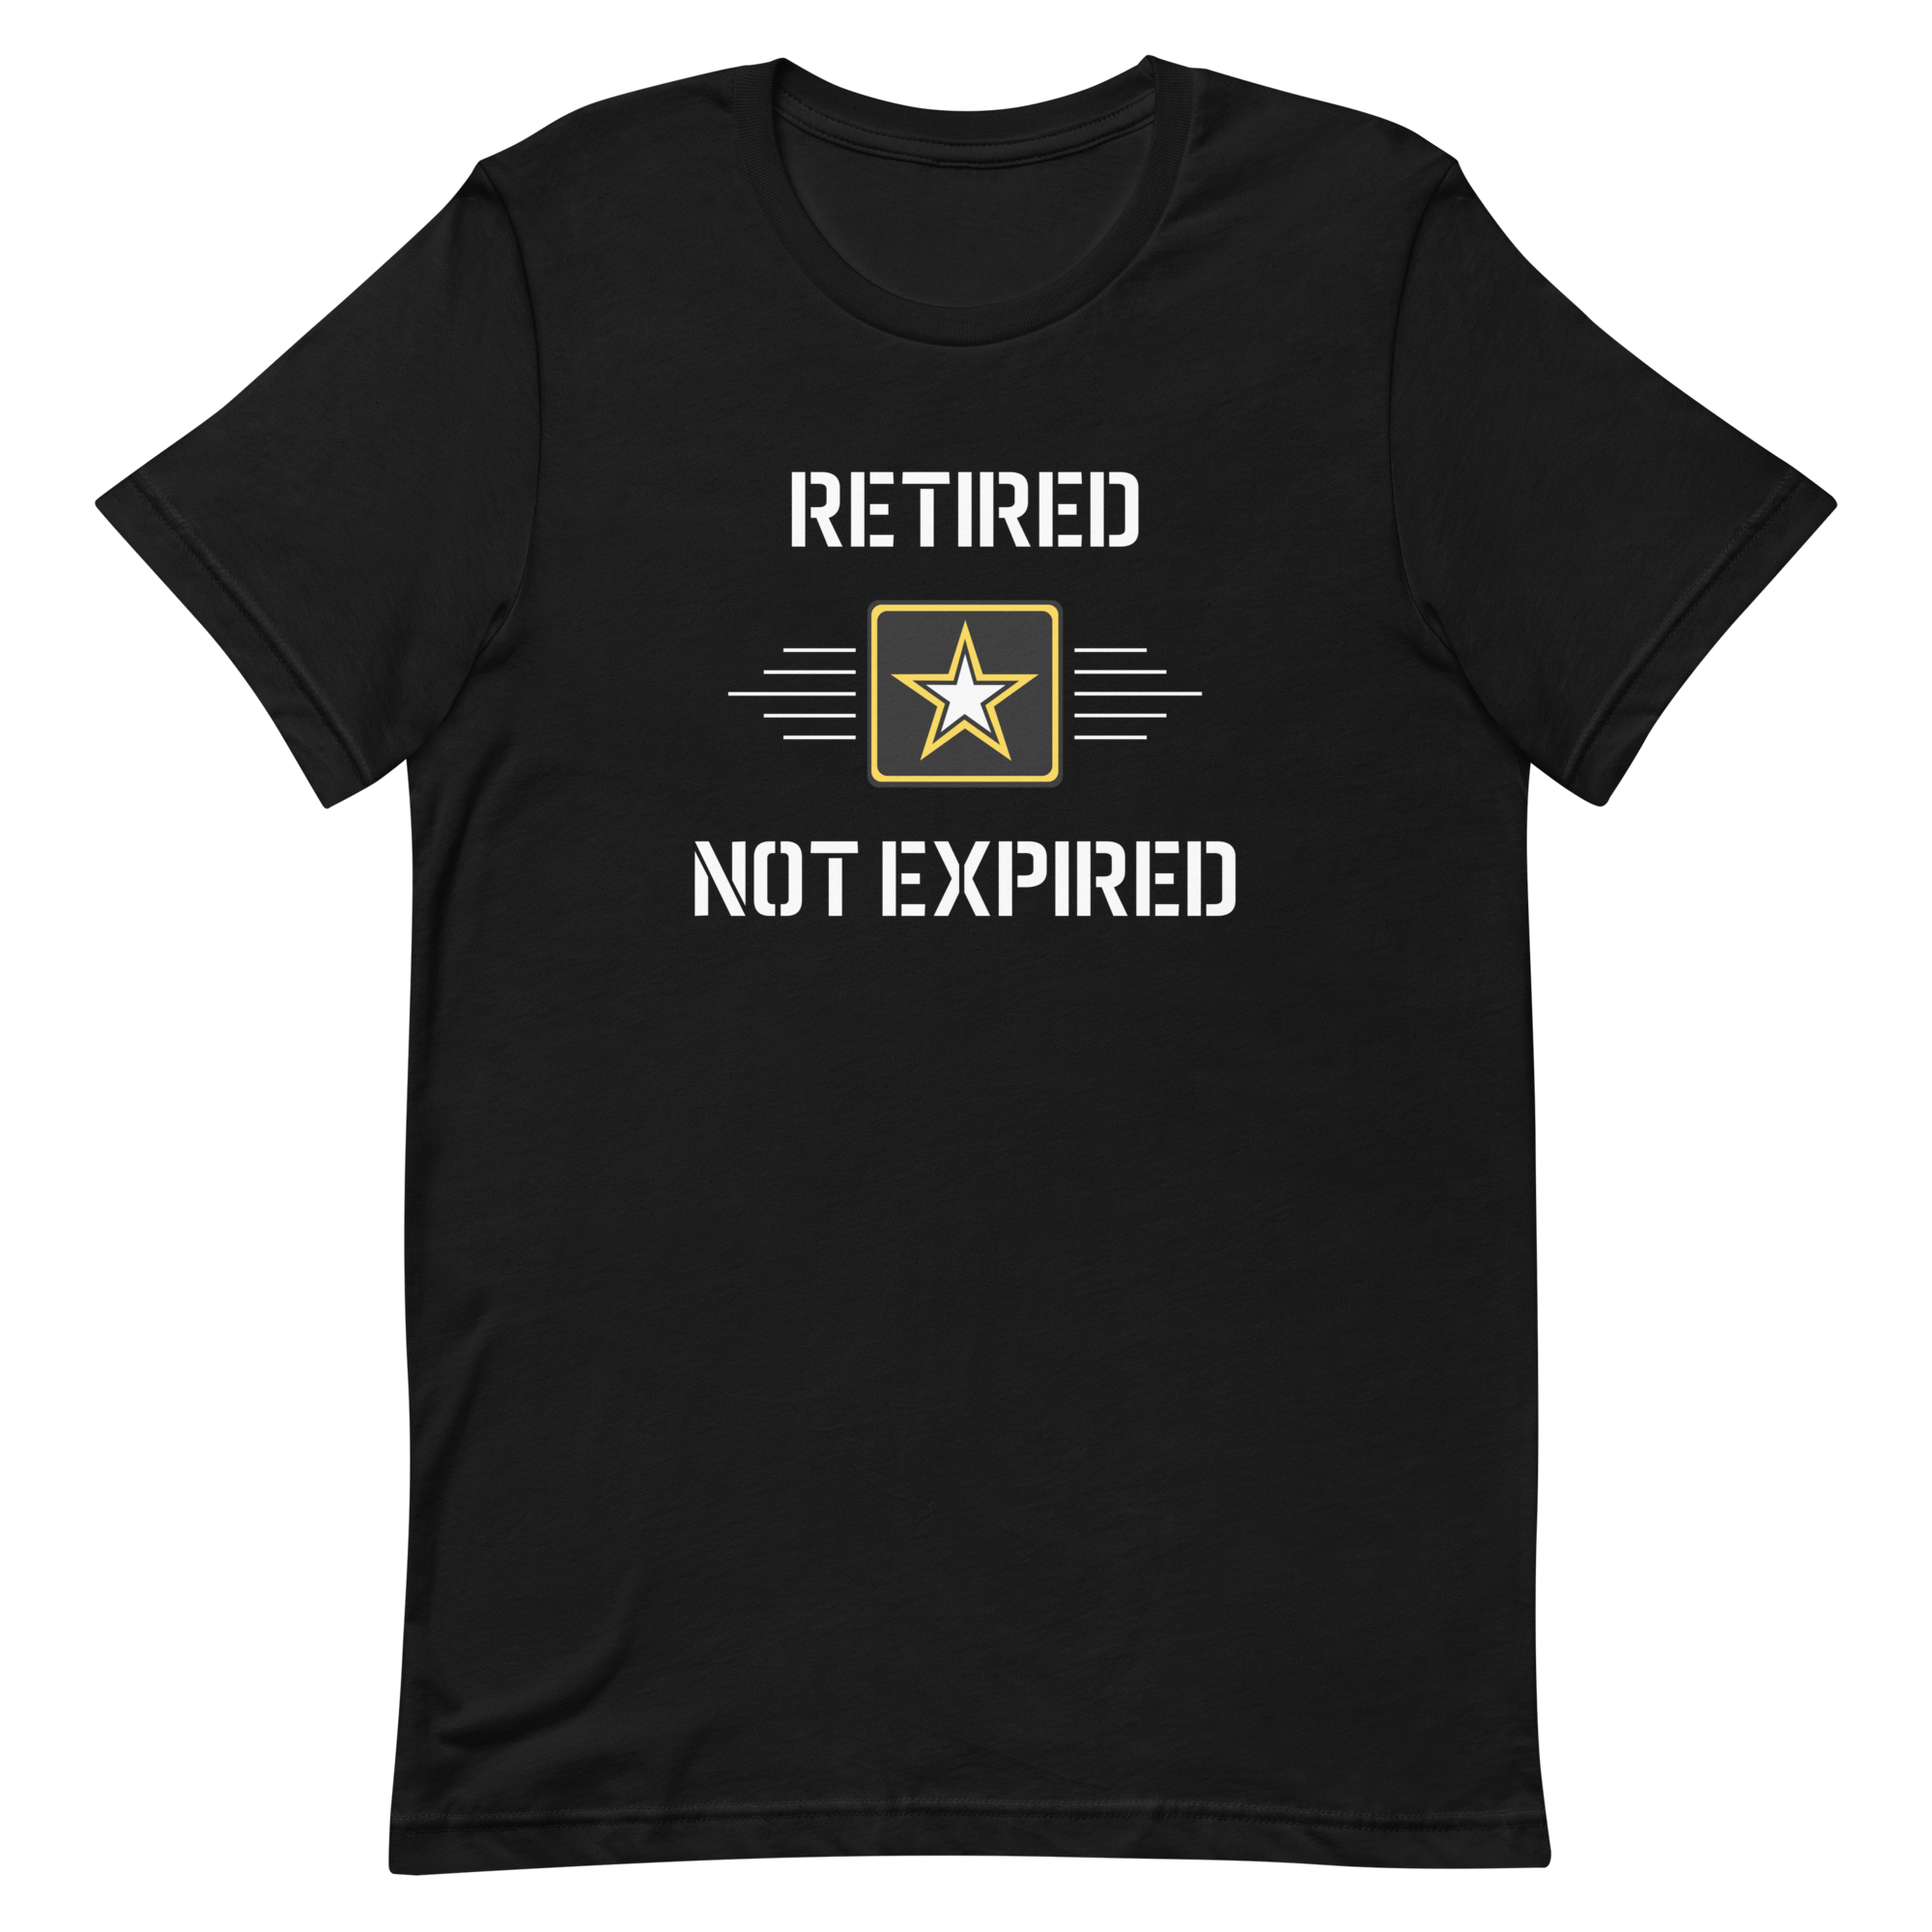 Retired - Not Expired - Army Military - T-Shirt - Black